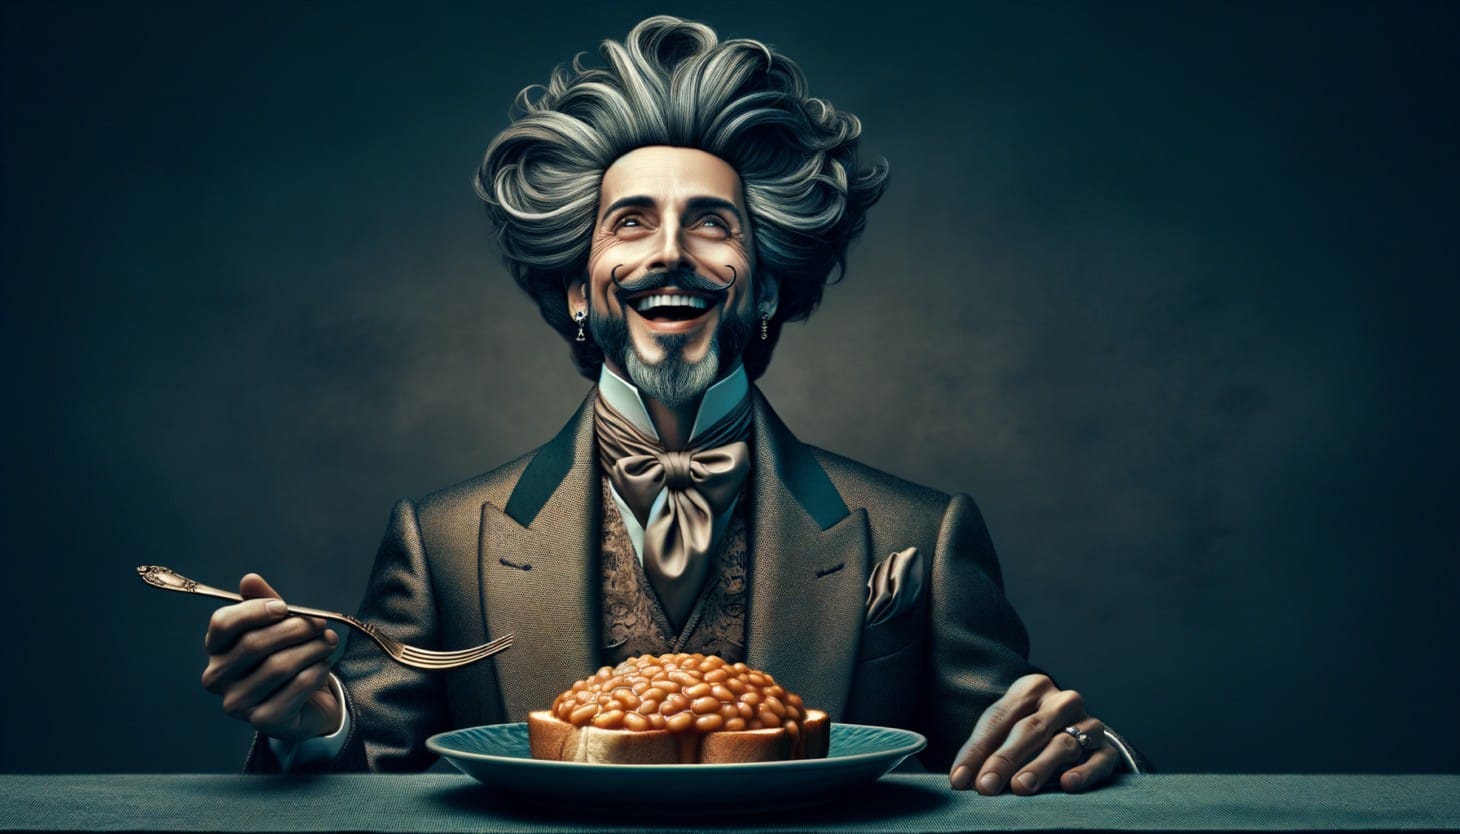 A well-dressed, posh and proper gentleman food-critic sits in front of a plate of beans-on-toast, but laughs happily at its remarkable adequacy.